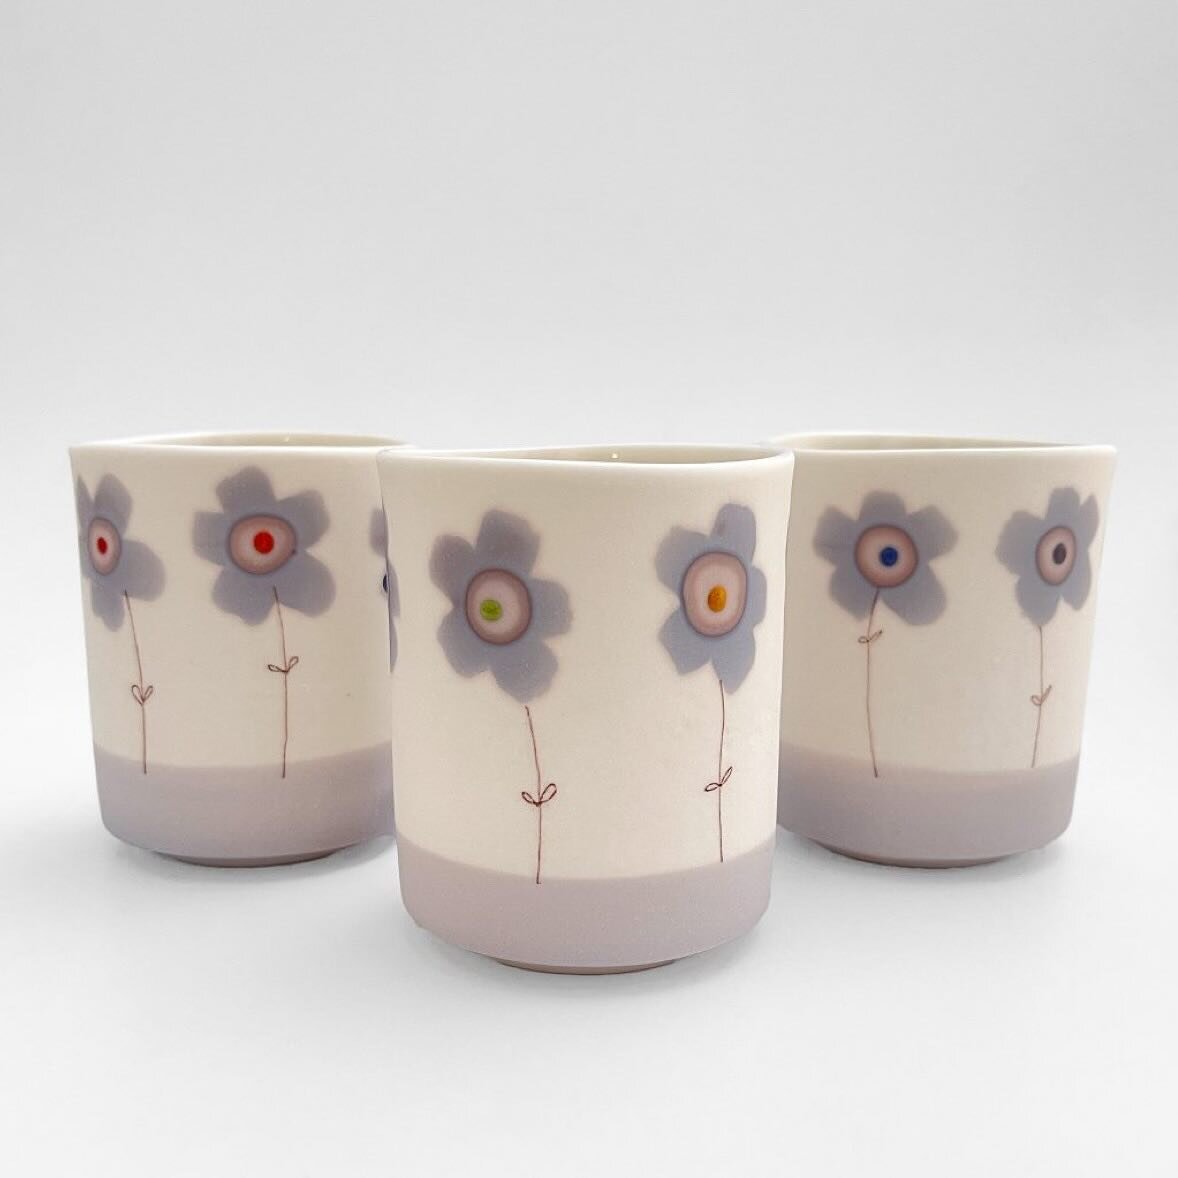 Repost from @freehandgallery
&bull;
Spring hasn&rsquo;t sprung yet, but these lavender whiskey cups by Sandra Torres might make you feel like it has! Find her work instore and on freehand.com. 
.
.
.
.

 #losangeles #w3rdst #finecraft #functional #po